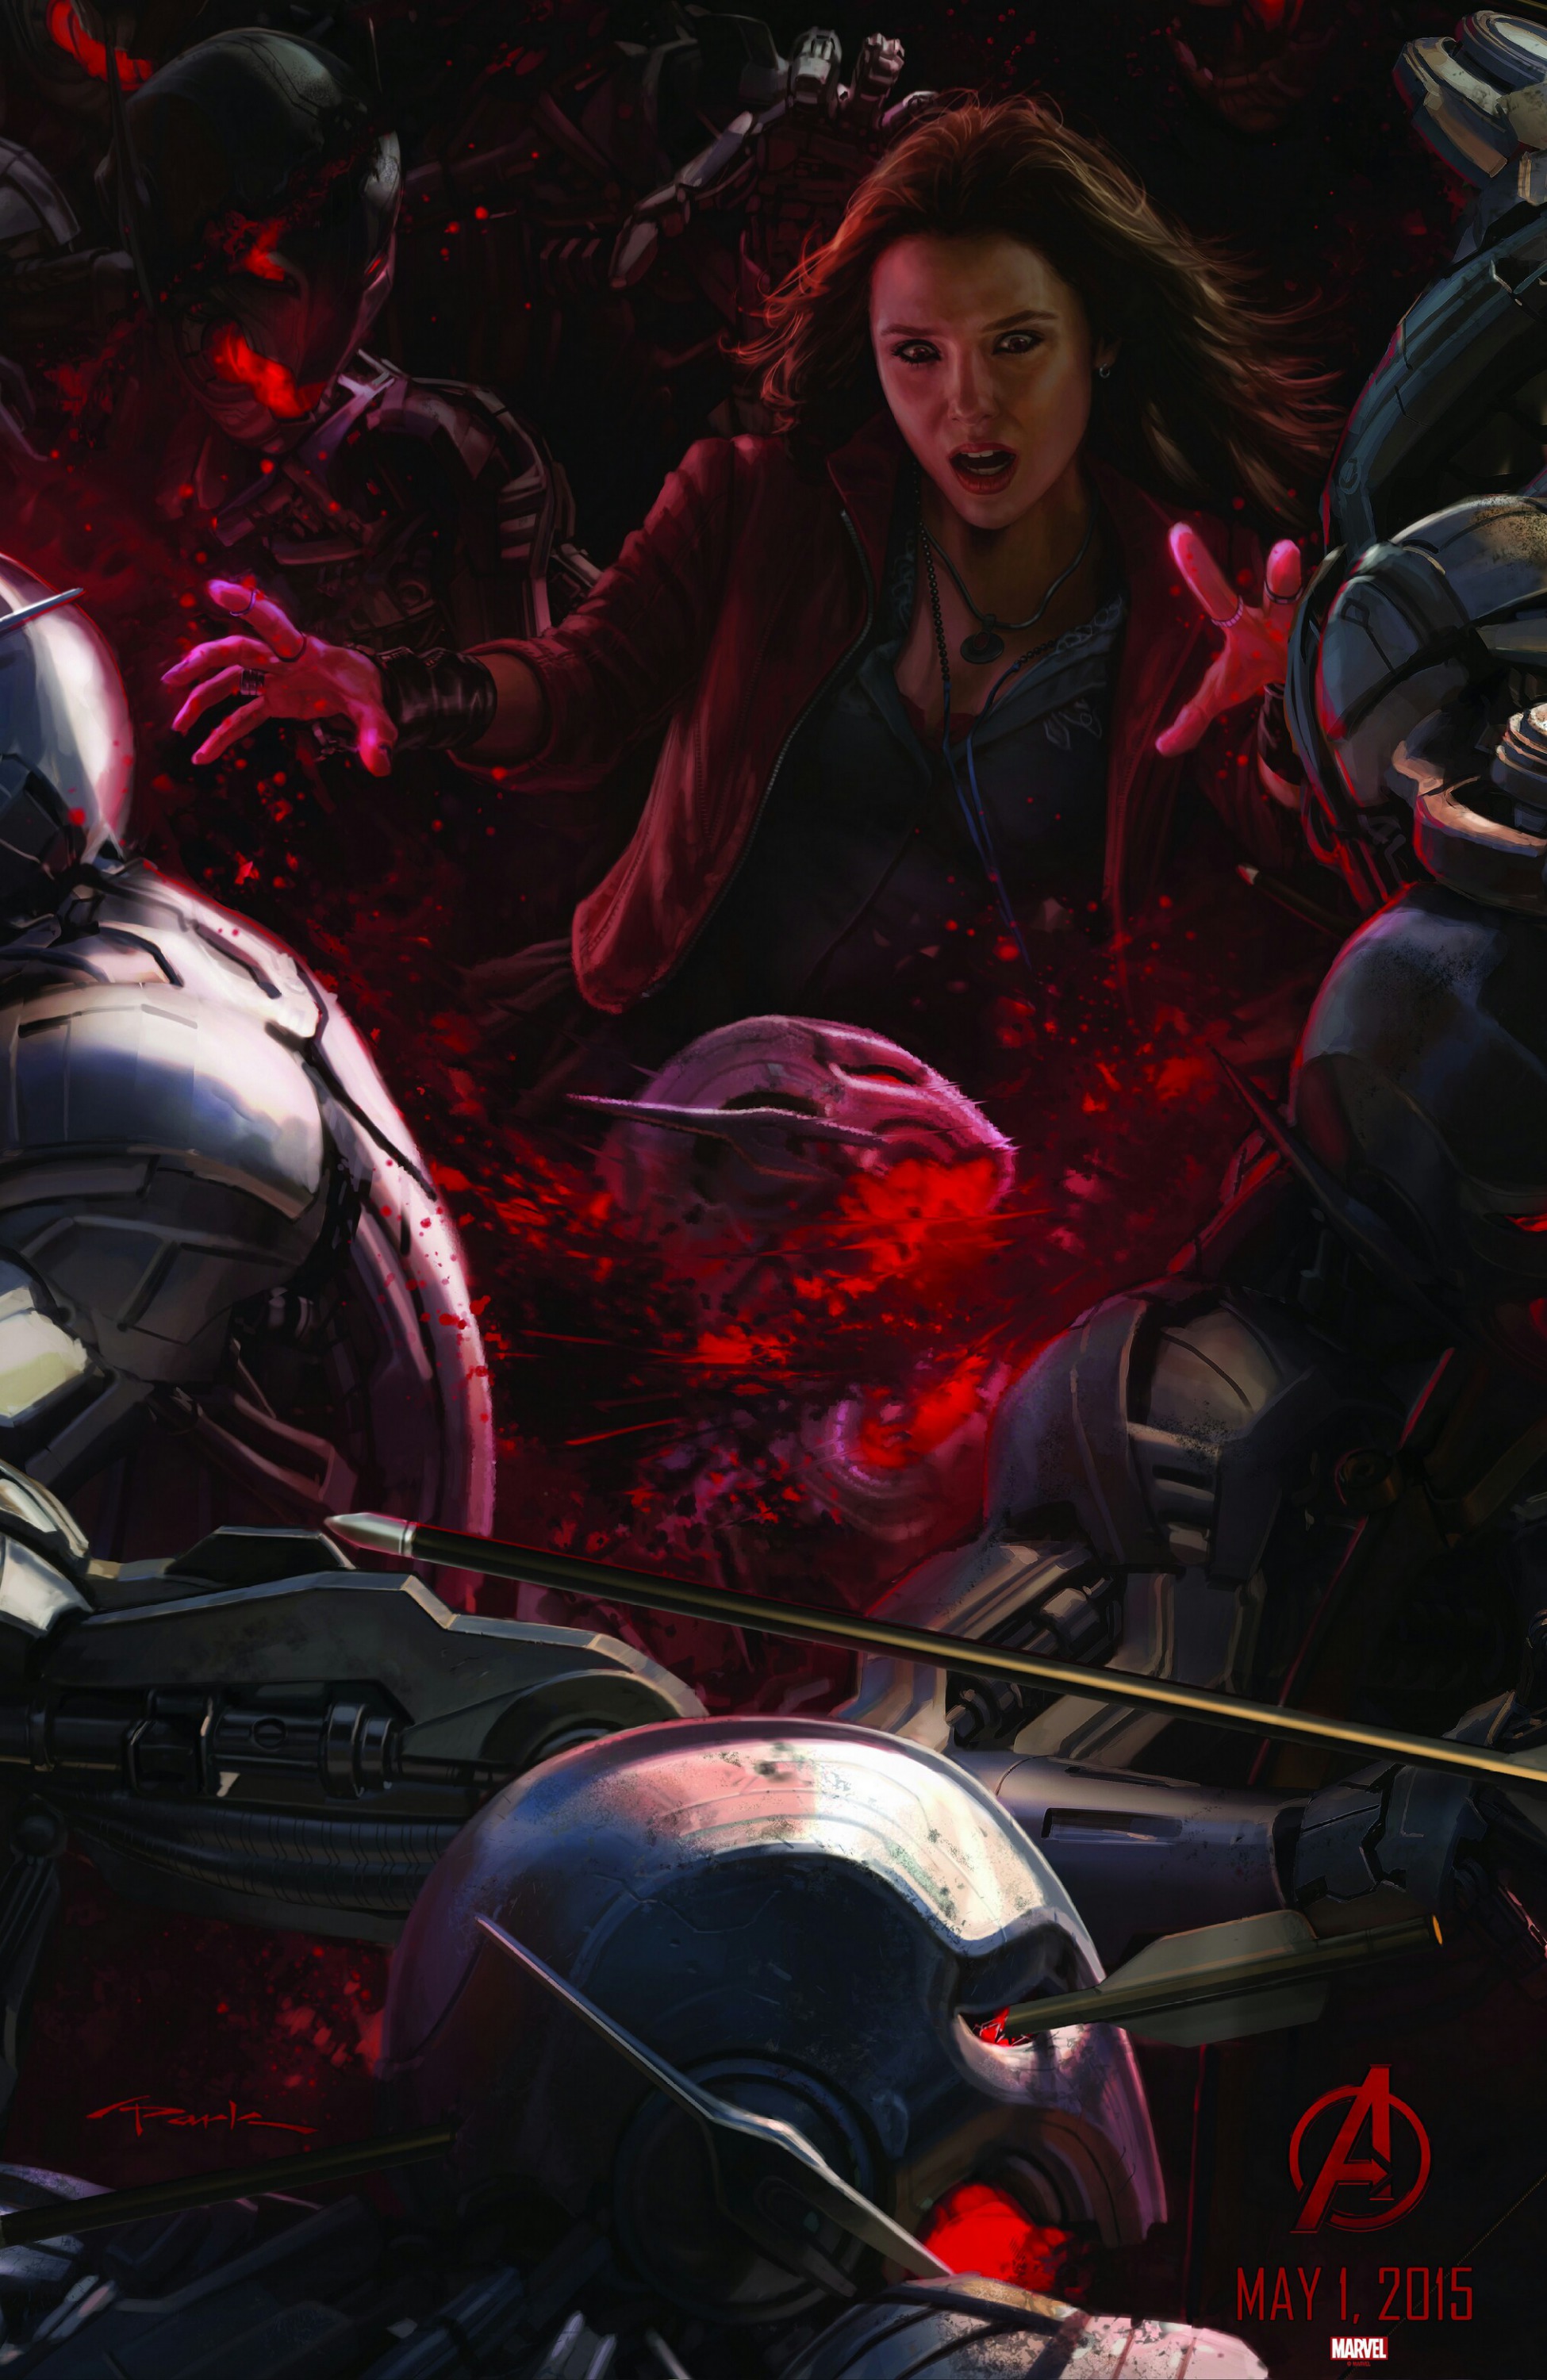 Avengers: Age of Ultron instal the new version for ios